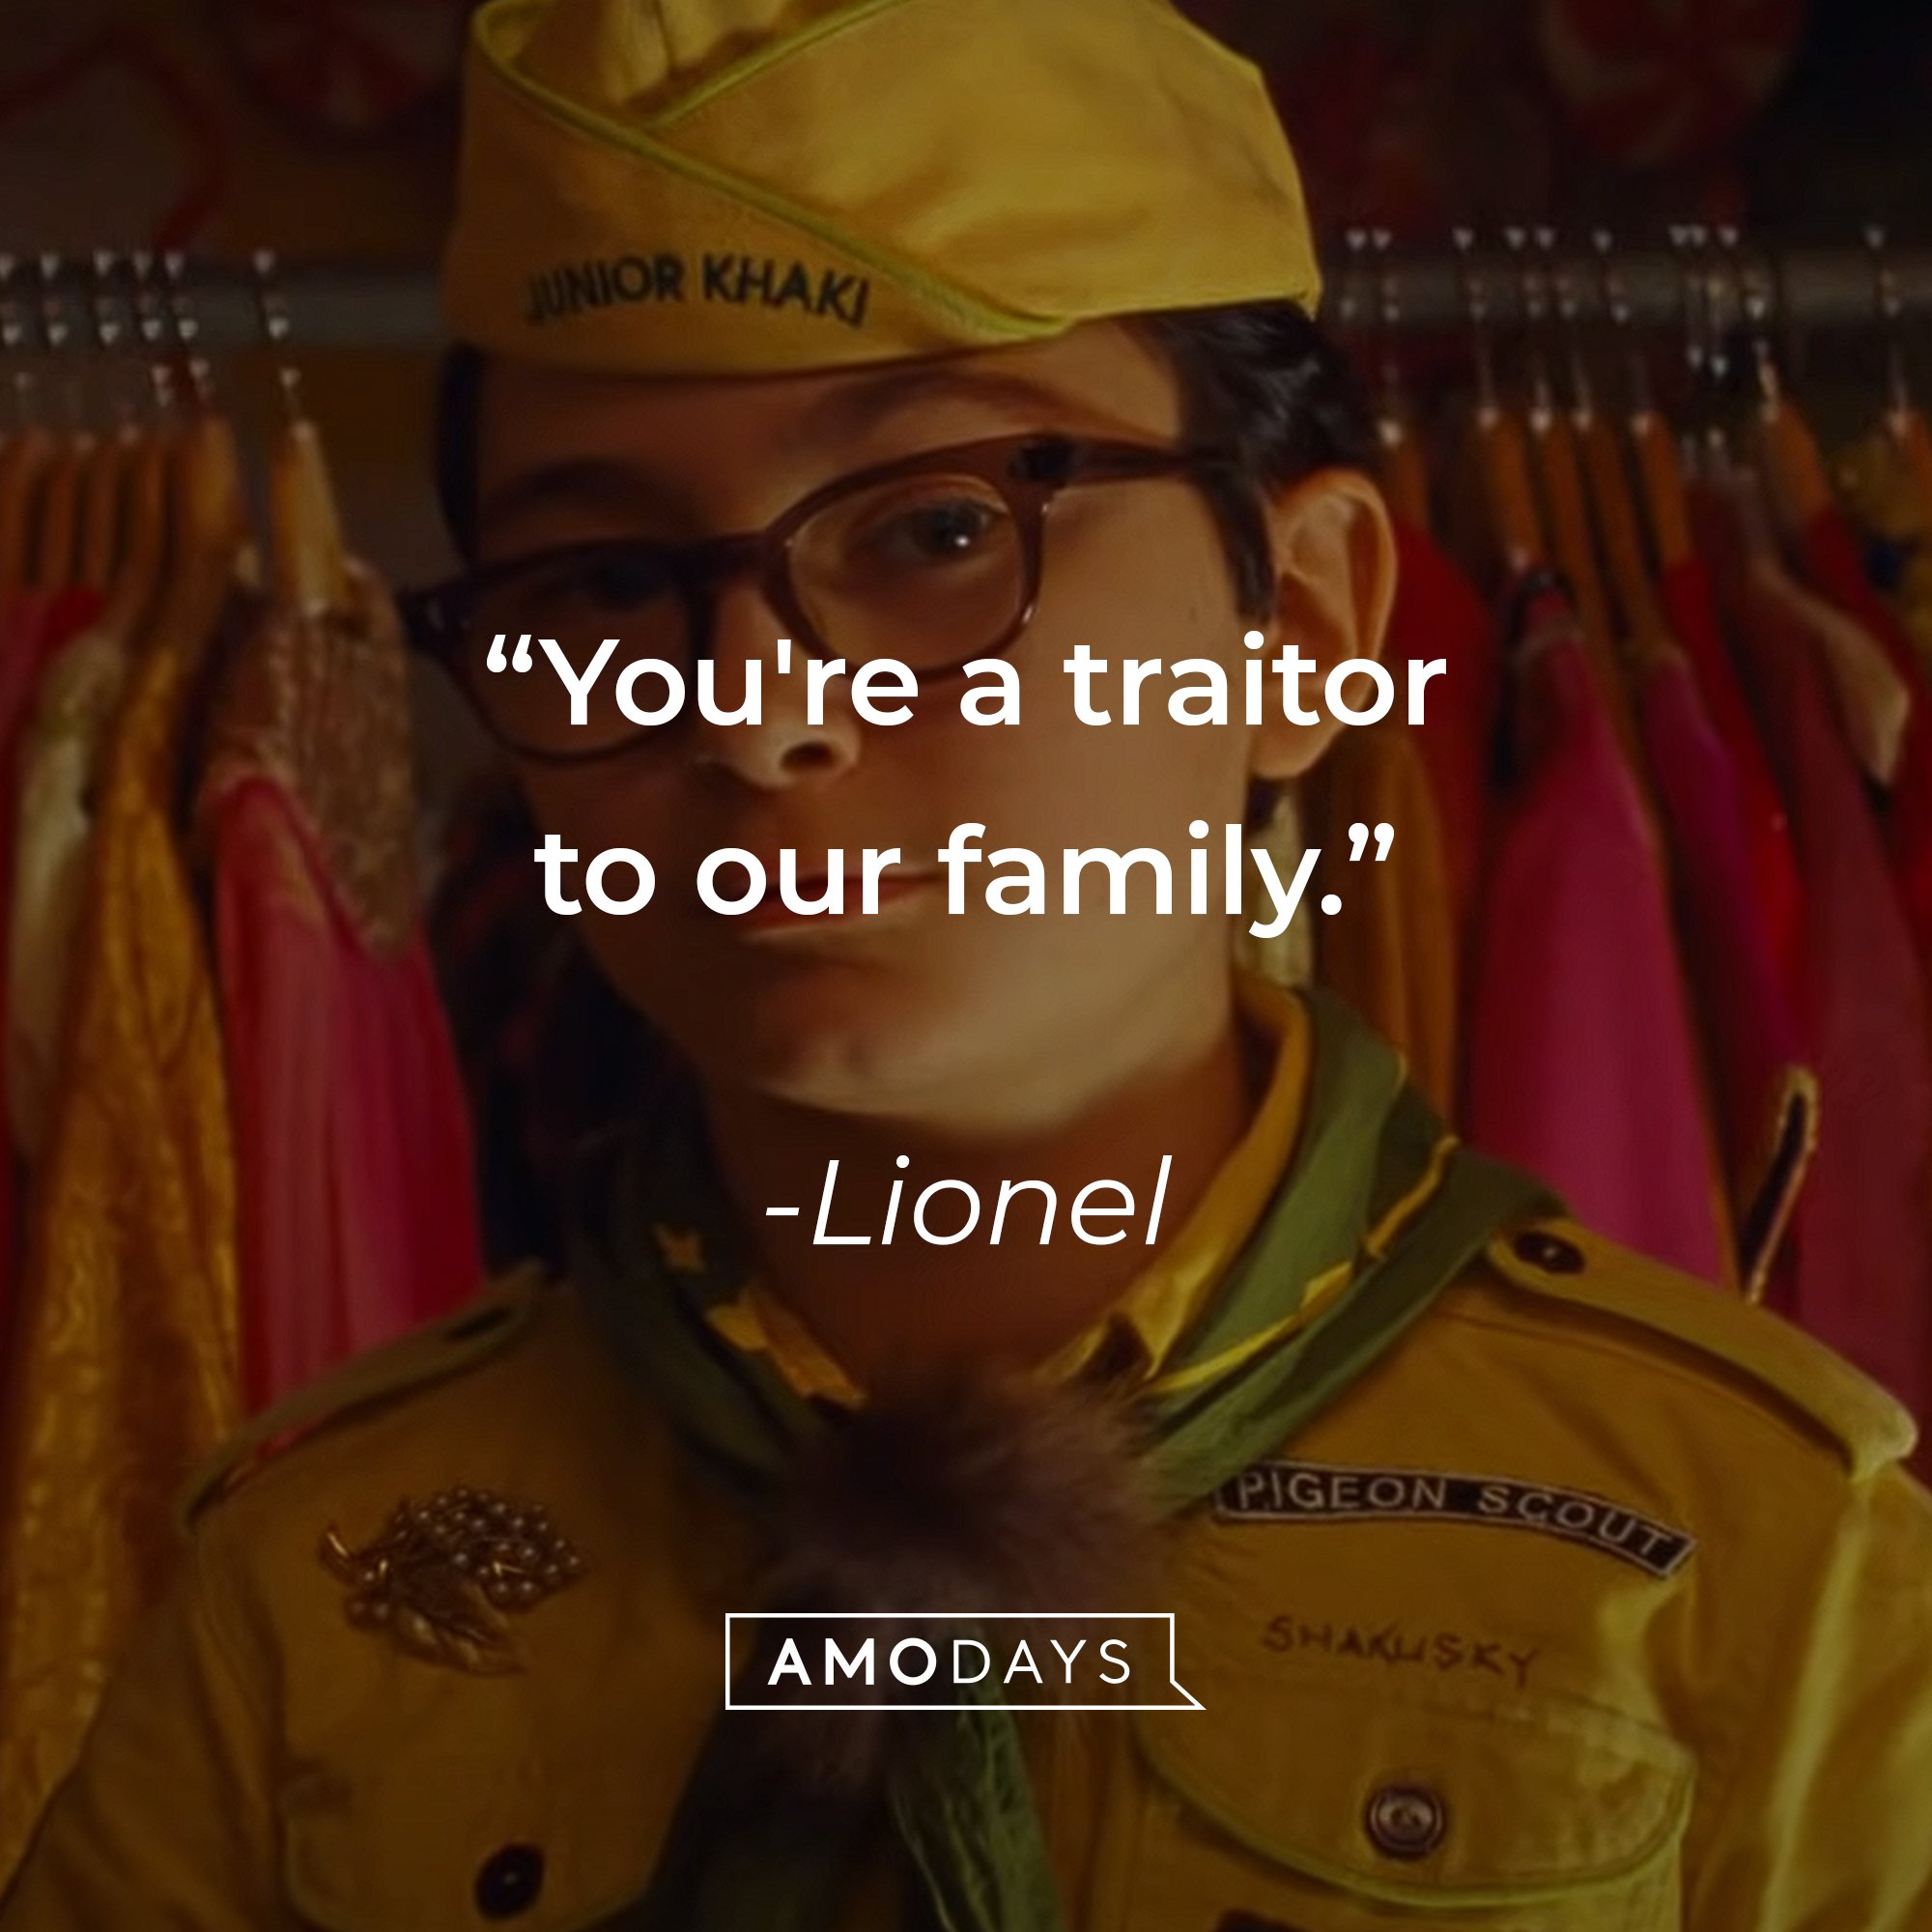 Lionel's quote: "You're a traitor to our family." | Image: AmoDays